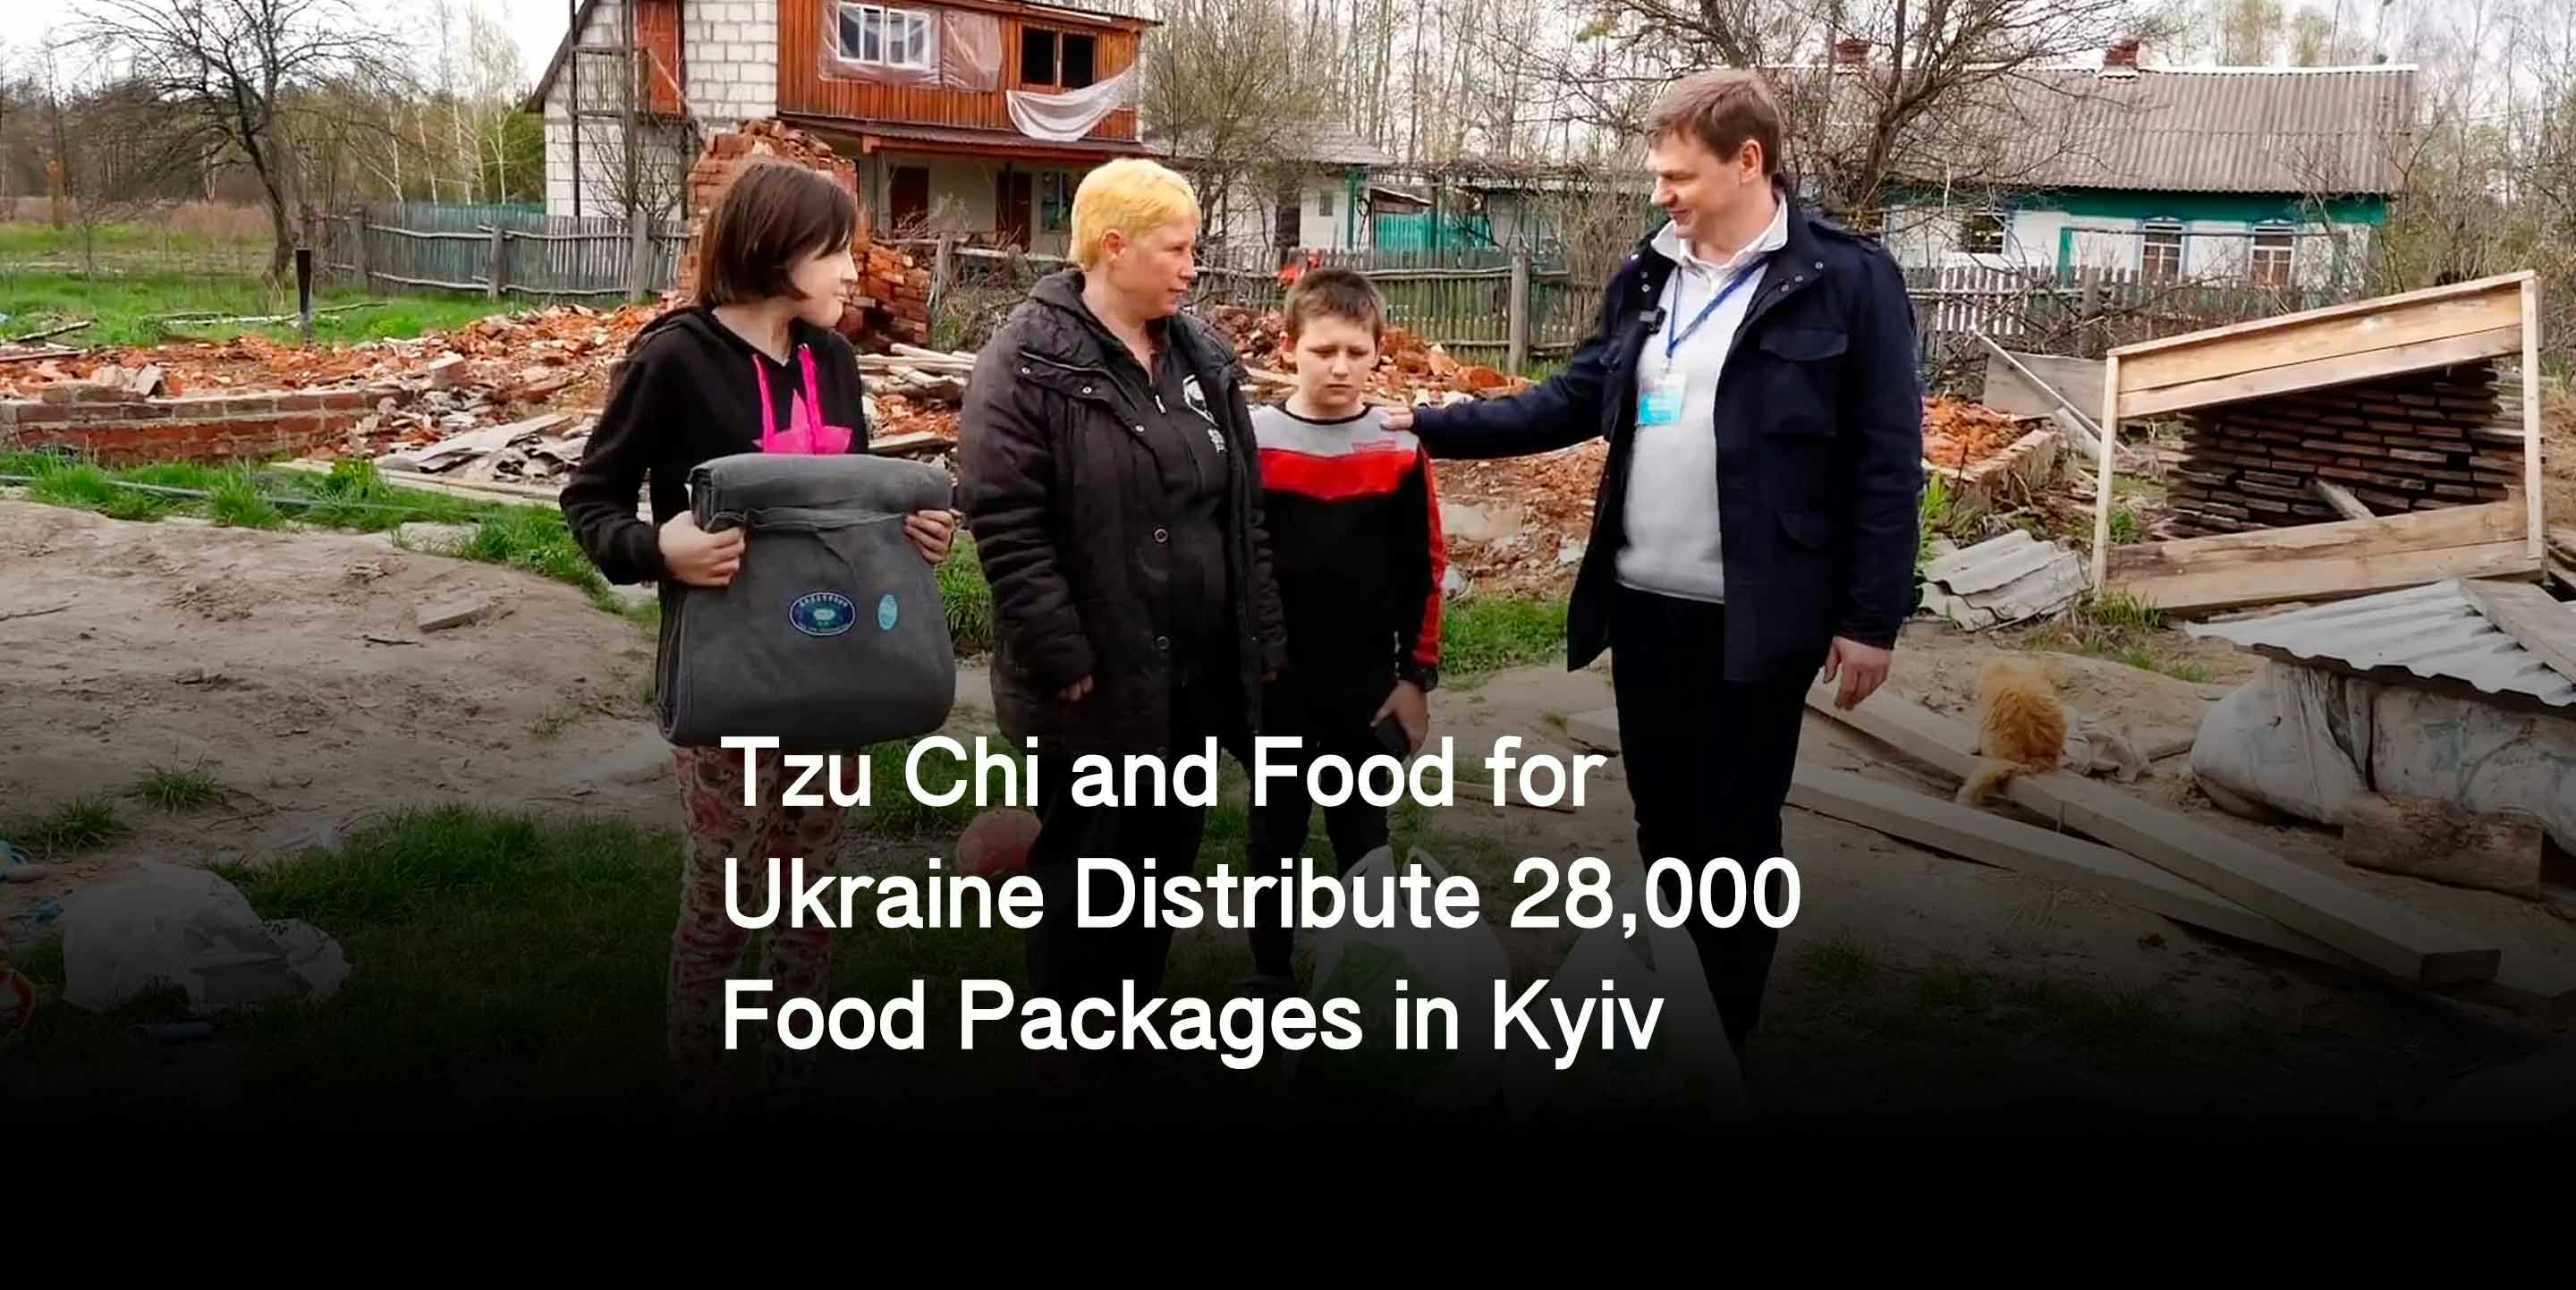 Tzu Chi and Food for Ukraine Distribute 28,000 Food Packages in Kyiv